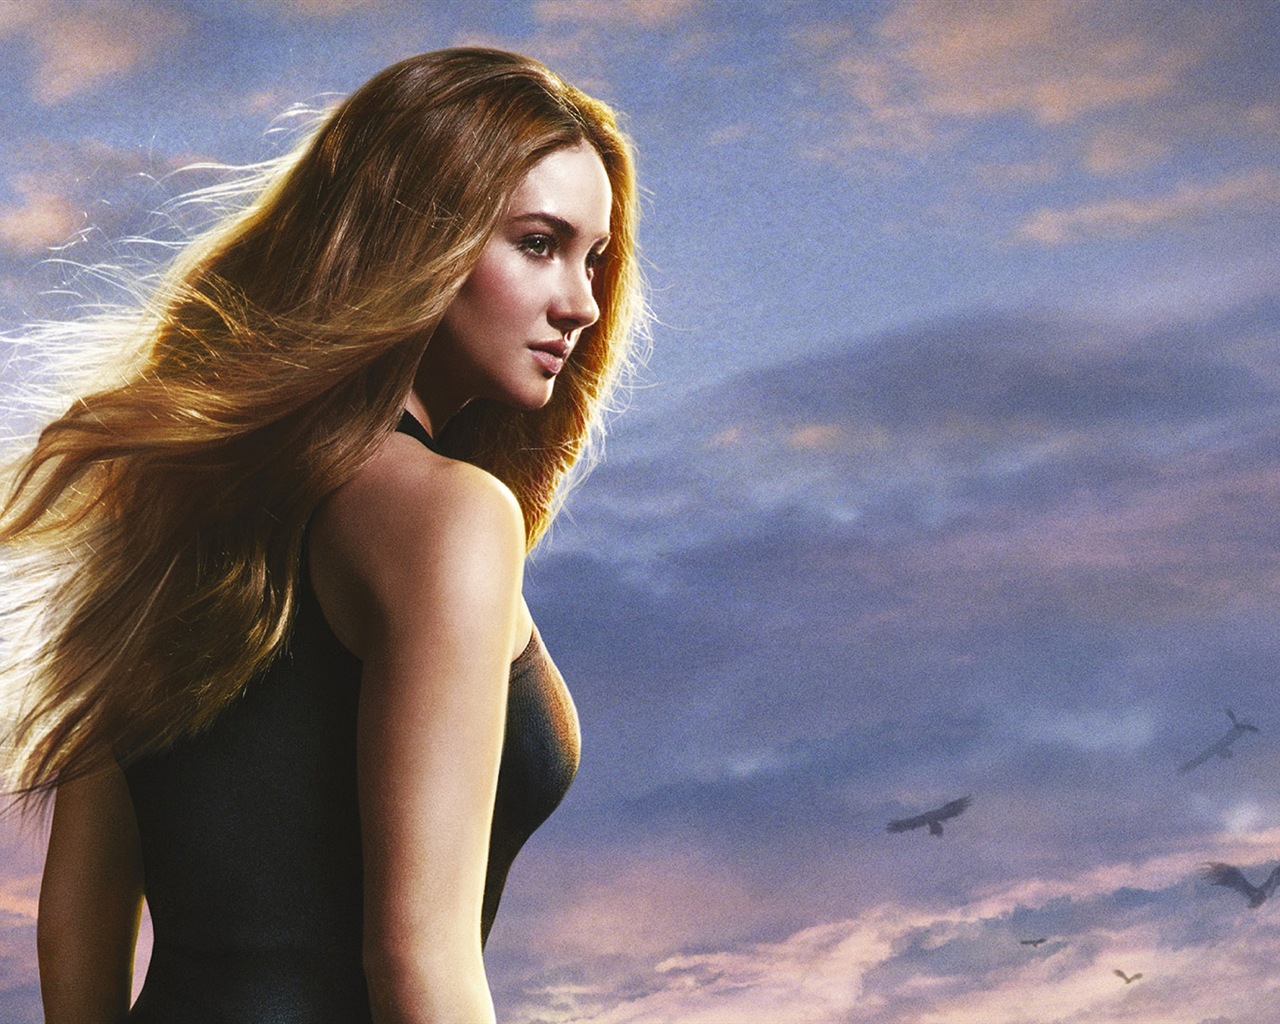 Divergent movie HD wallpapers #11 - 1280x1024